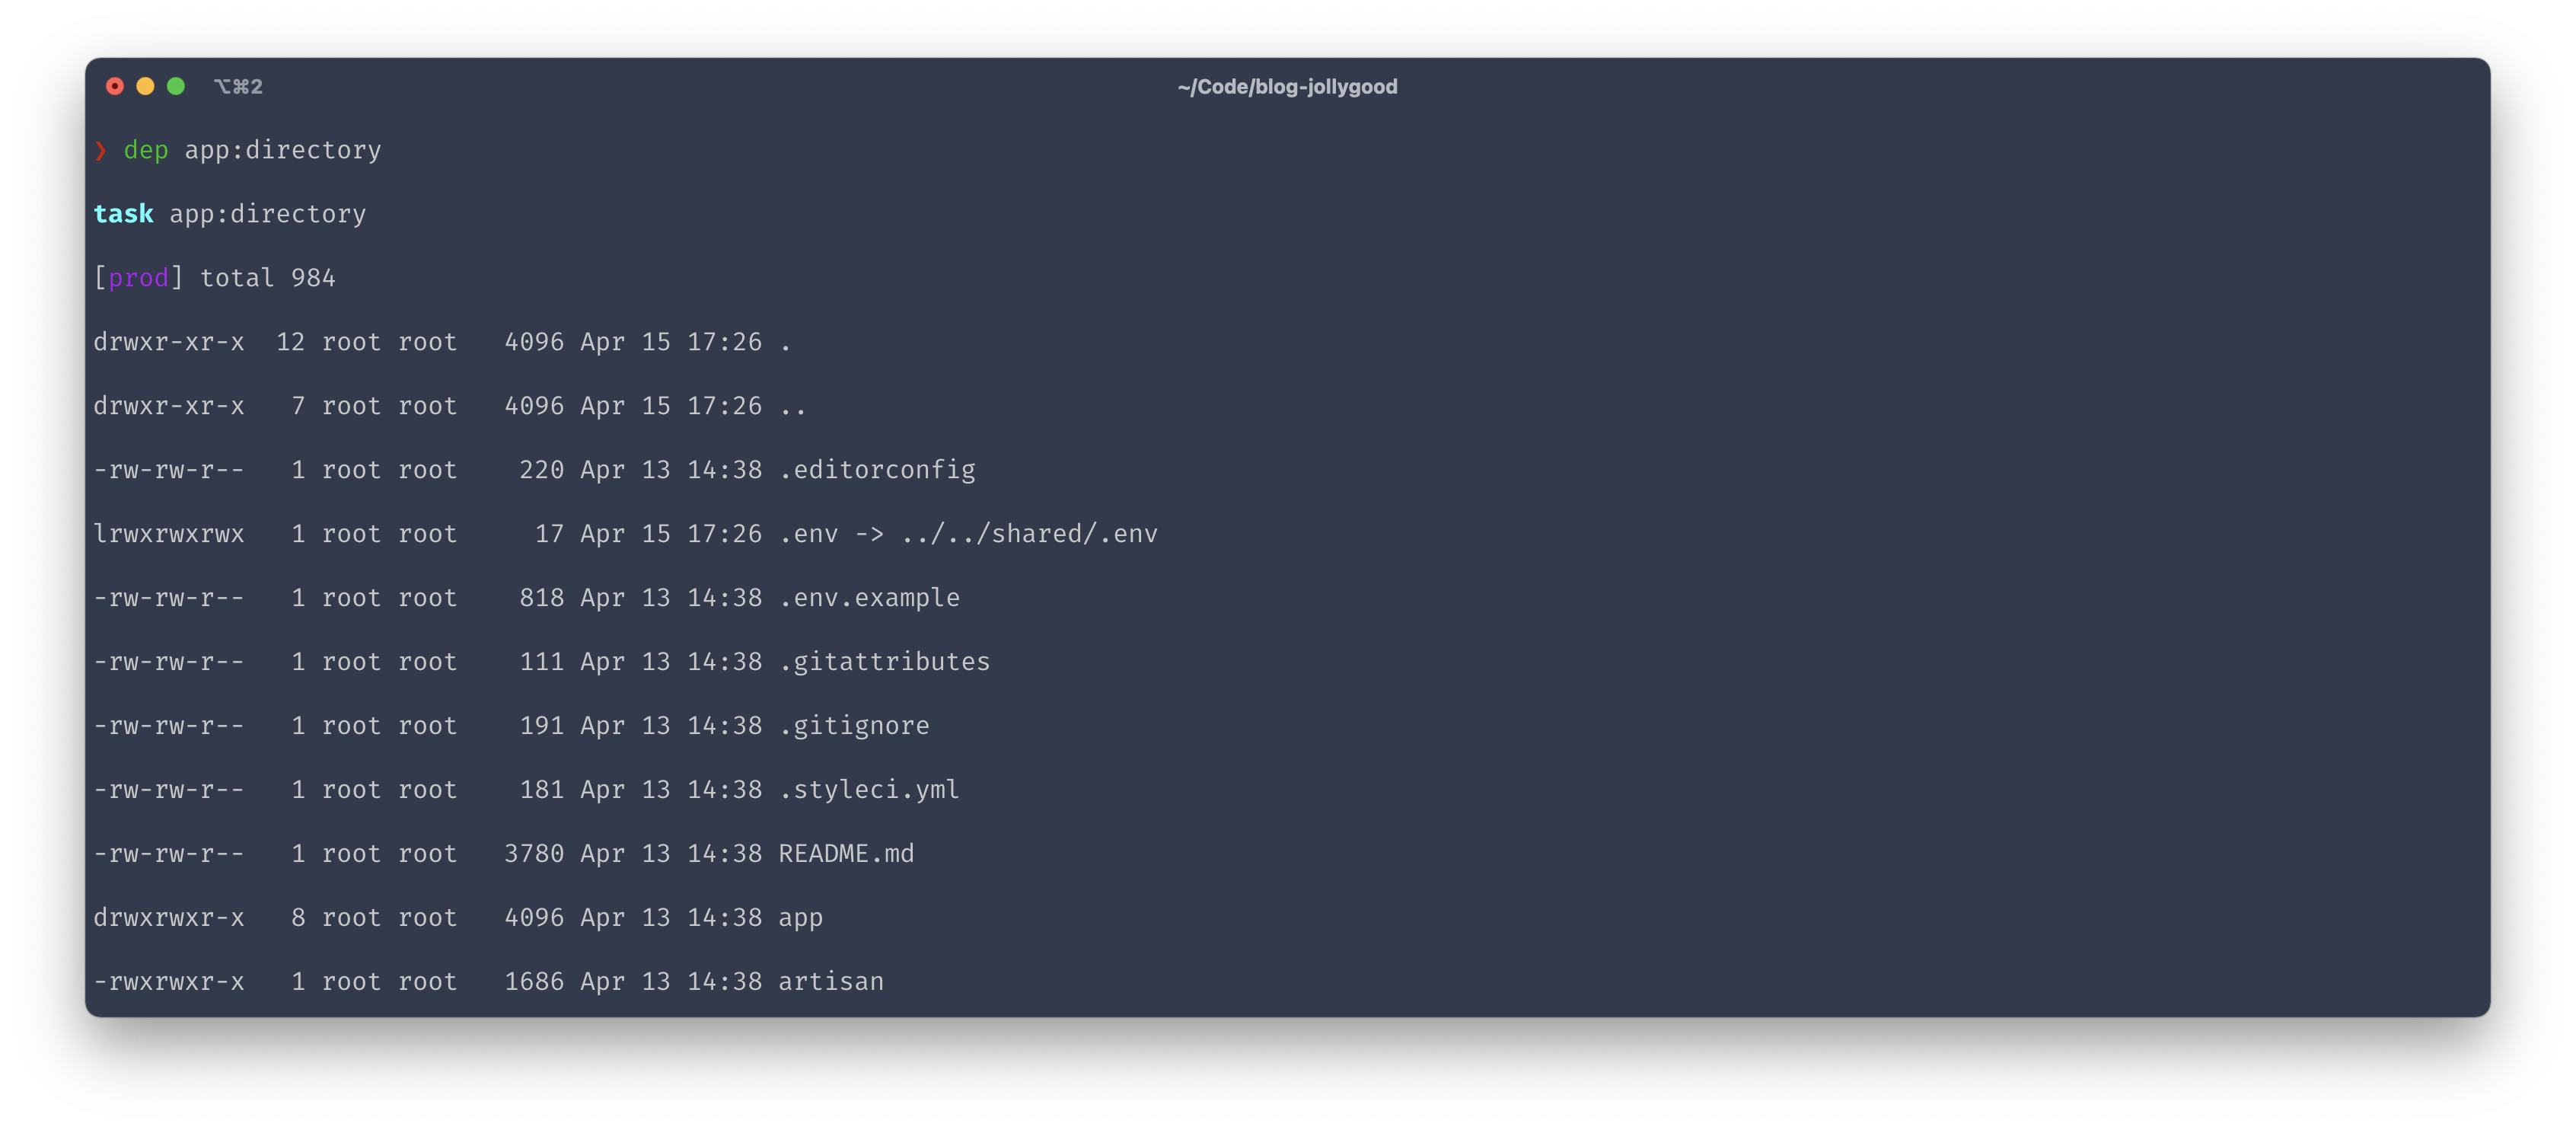 Screenshot of the terminal output from running “dep app:directory”. It shows the output of “ls -la” from a typical Laravel application.